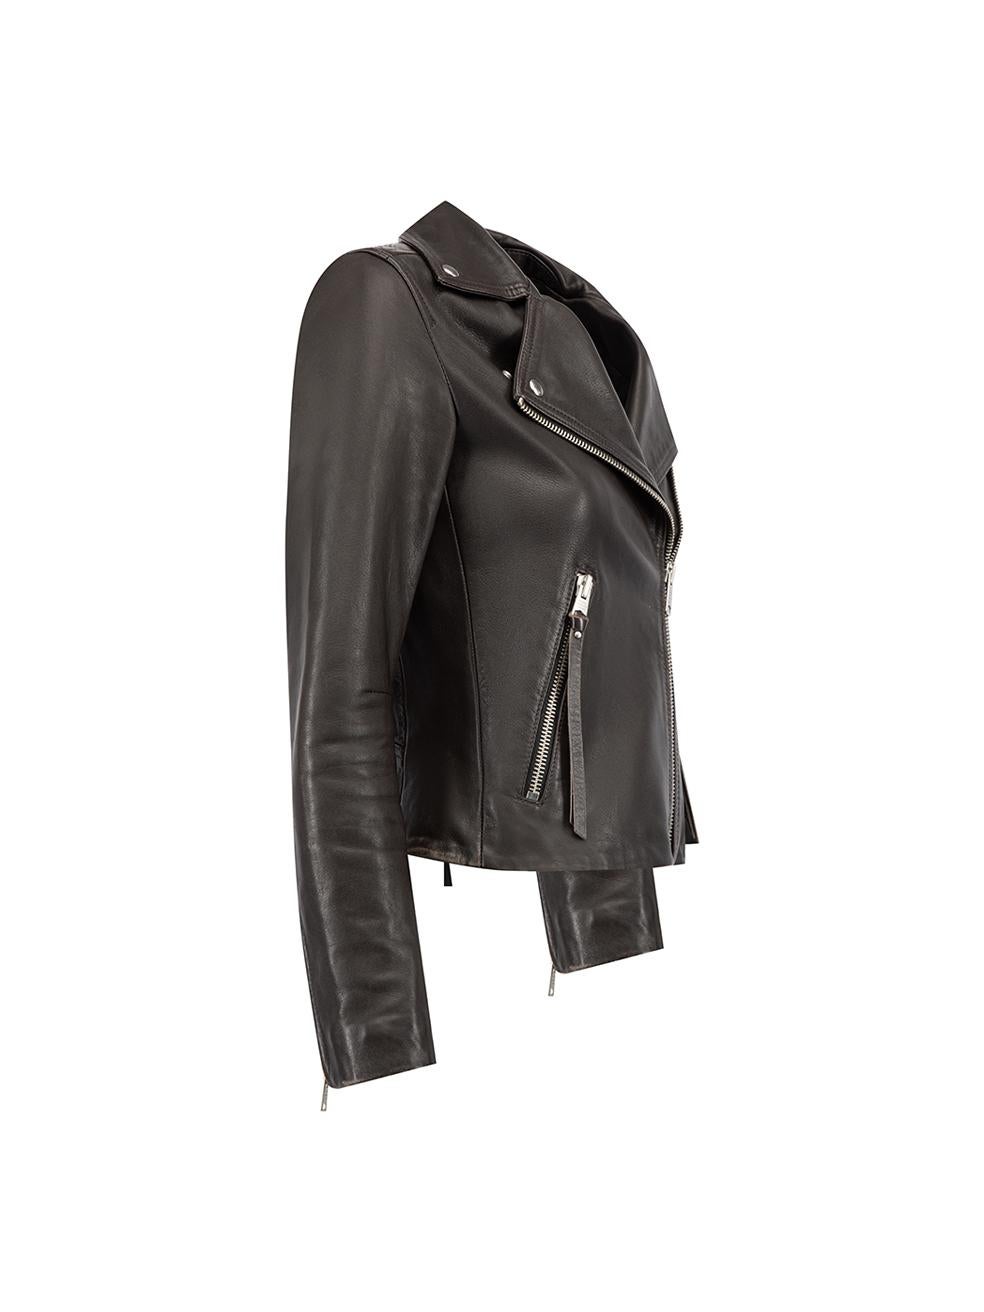 CONDITION is Good. Minor wear to jacket is evident. Light wear to leather exterior where visible scuffing can be seen at the hemline and cuffs on this used AllSaints designer resale item. Details Dark Brown Leather Cropped biker jacket Zipped cuffs